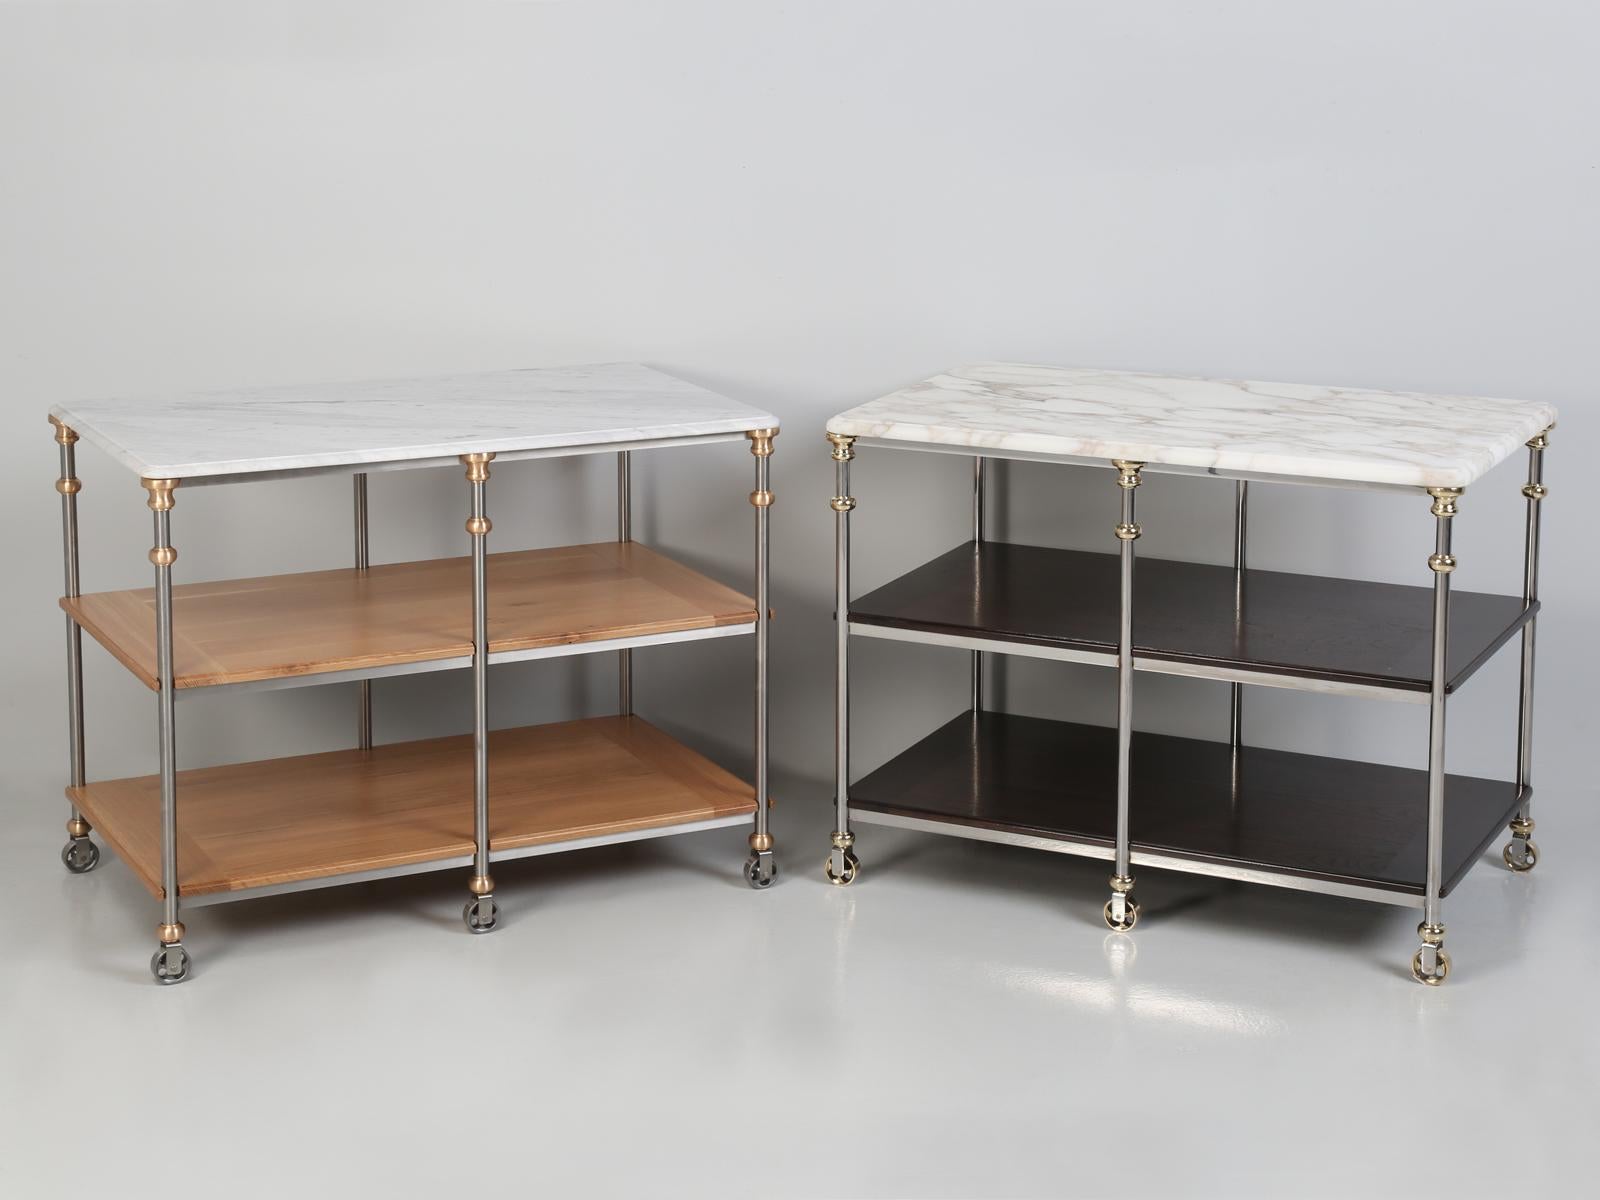 French Industrial Style Stainless and Brass Kitchen Island Built to Order 9